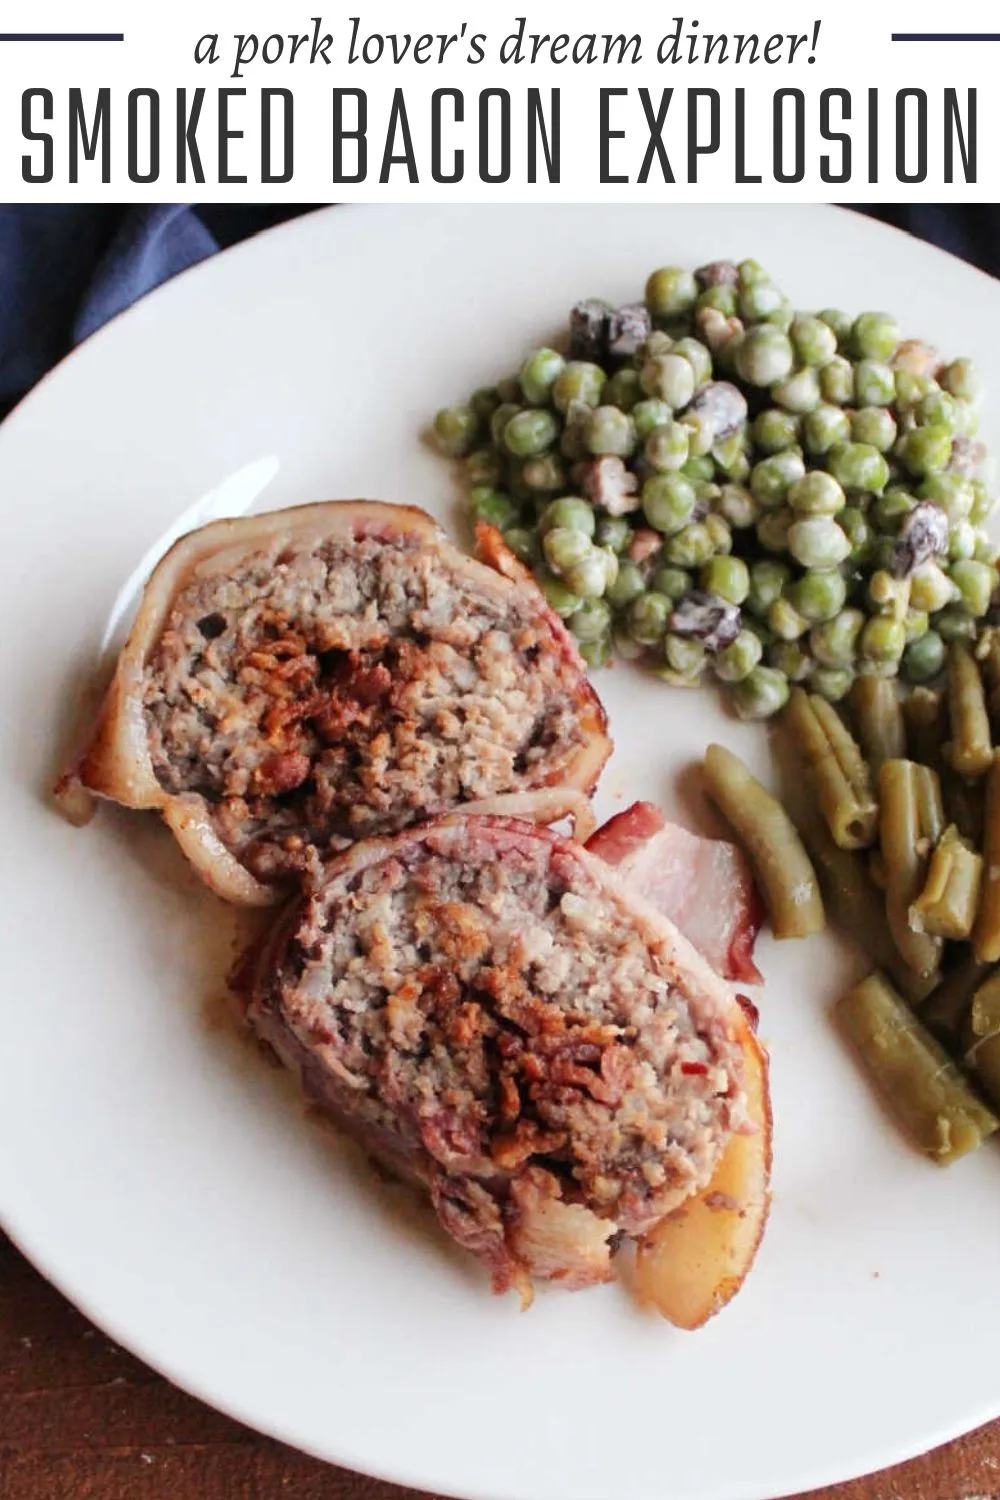 This bacon explosion is loaded with bacon goodness just as the name suggests. Whether you call it a fatty or an explosion, this meaty rolled treat is part smoked meatloaf and part something altogether different. It is sure to win any bacon fan over.